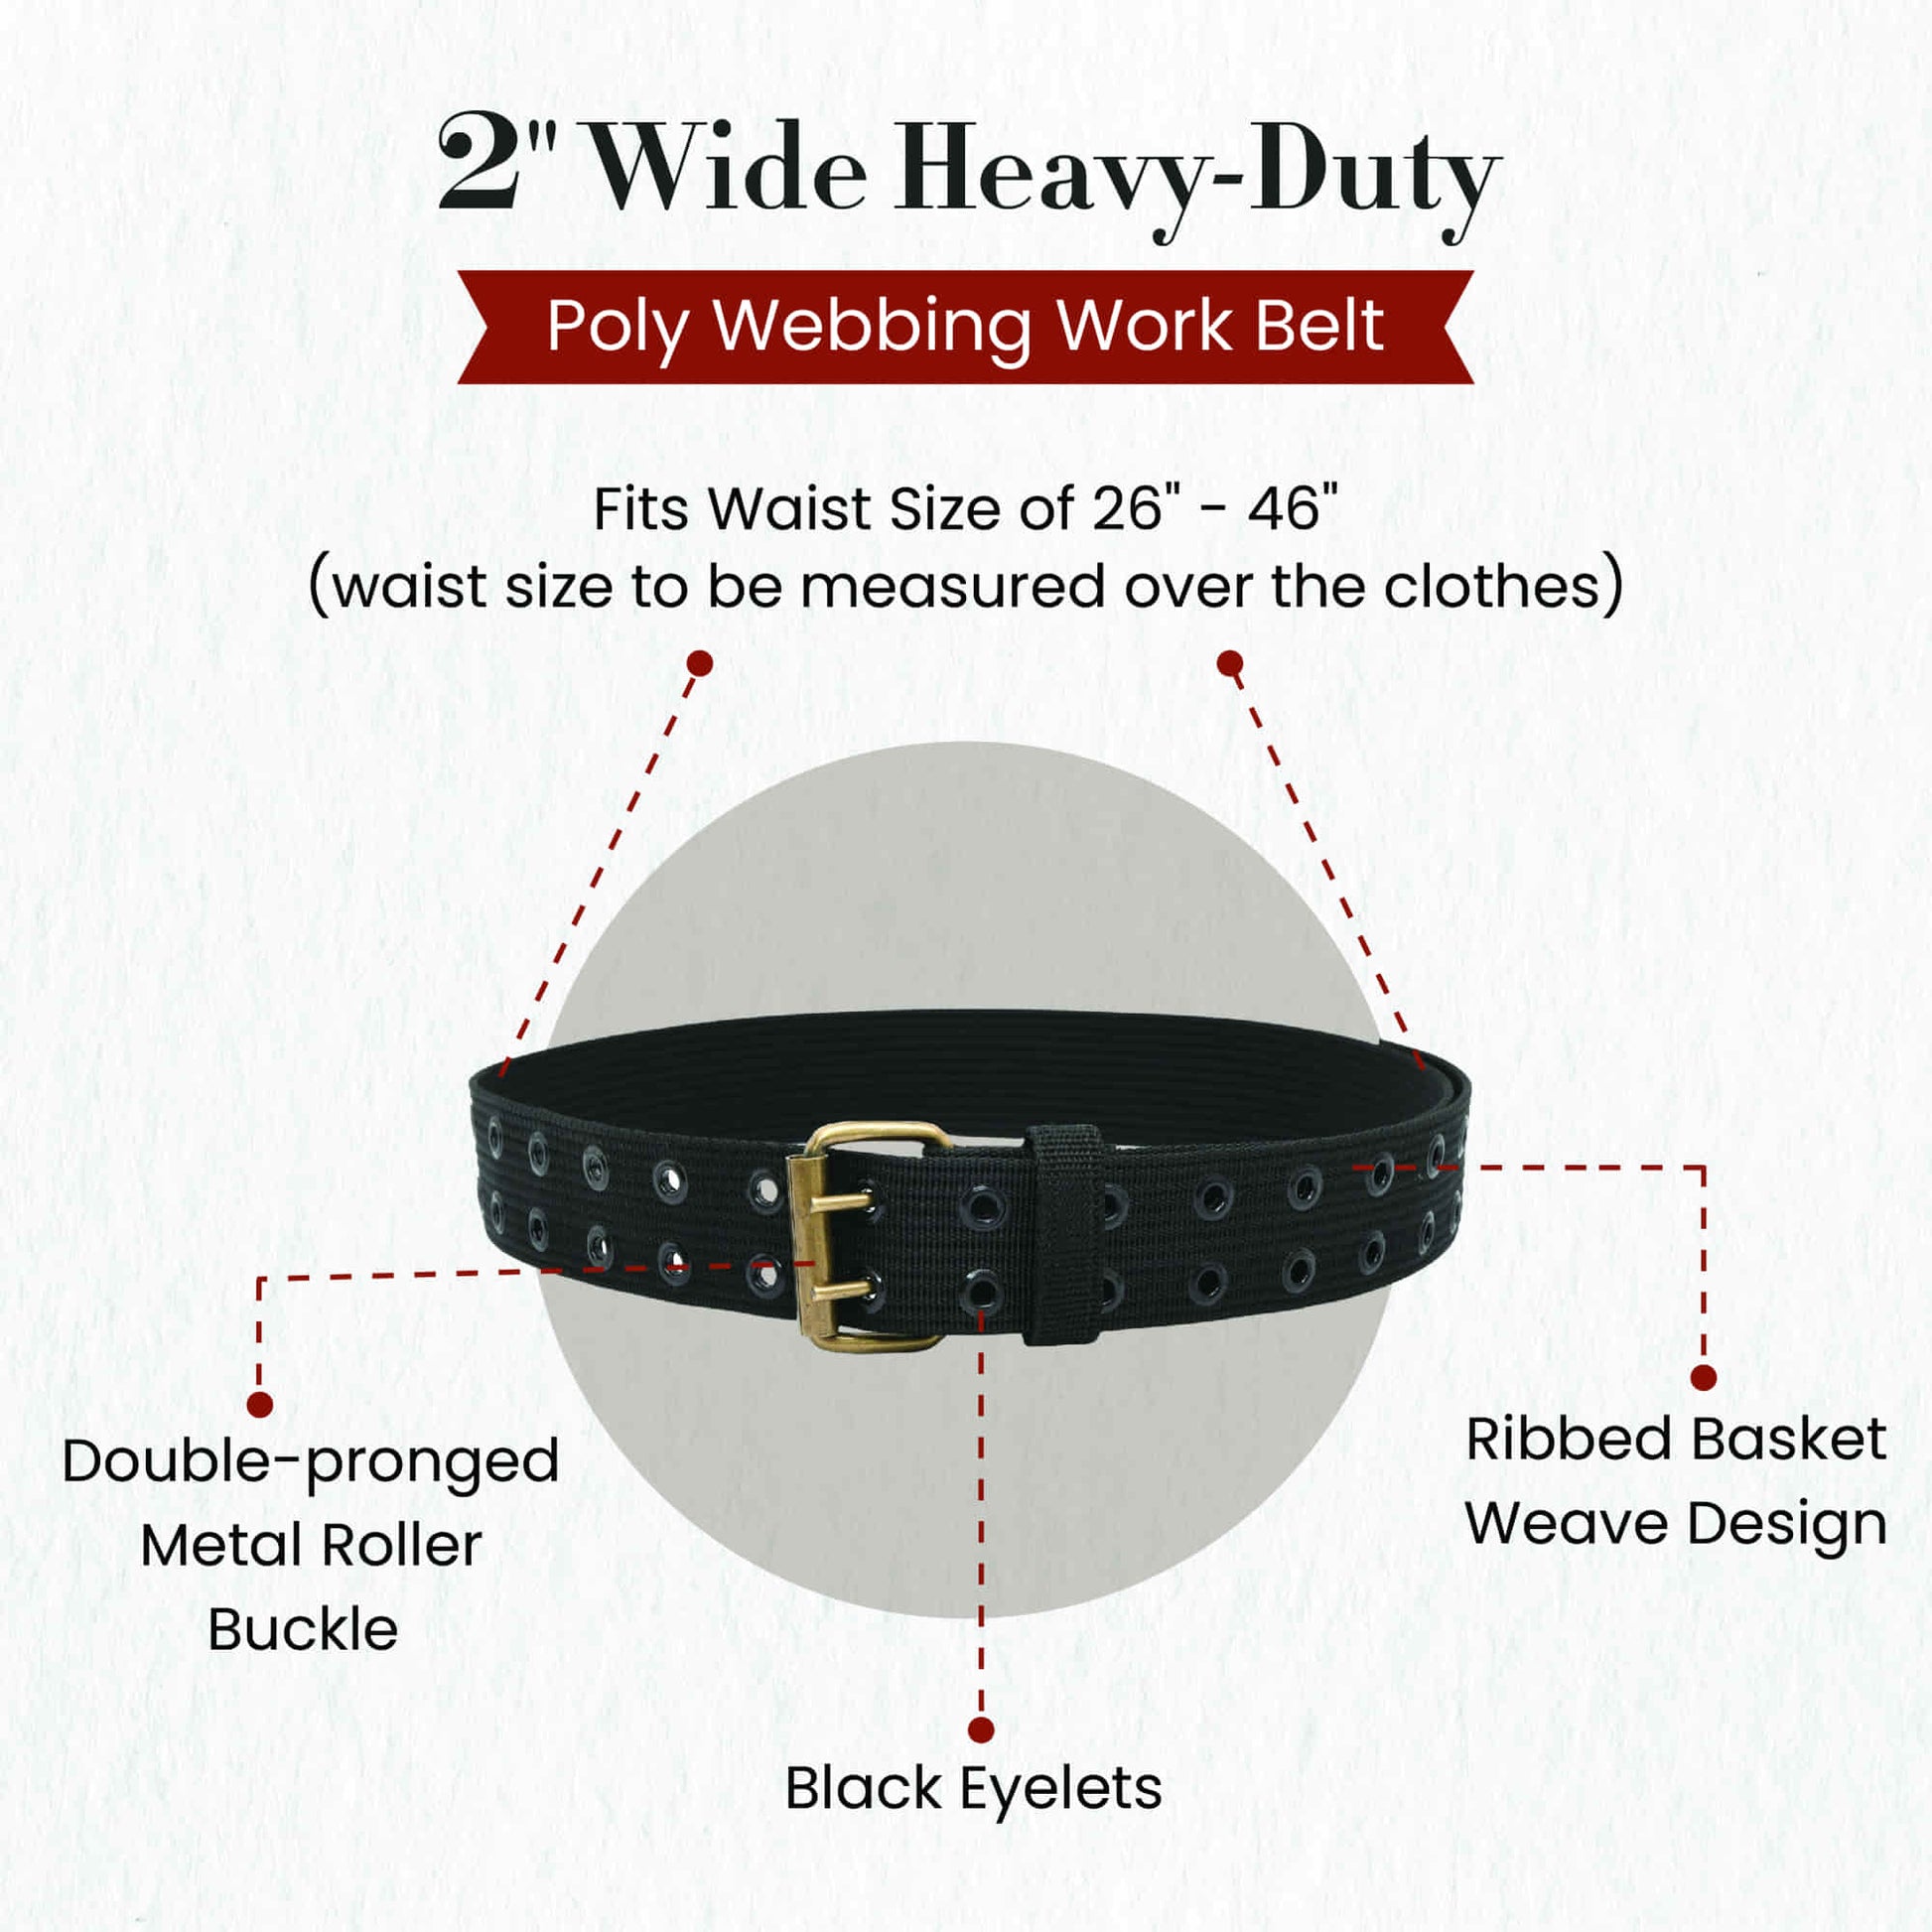 Style n Craft 95012 - 2" Wide Heavy Duty Black Polyweb Work Belt with Antique Finish Double Prong Metal Roller Buckle and Metal Eyelets - Front View Showing the Details